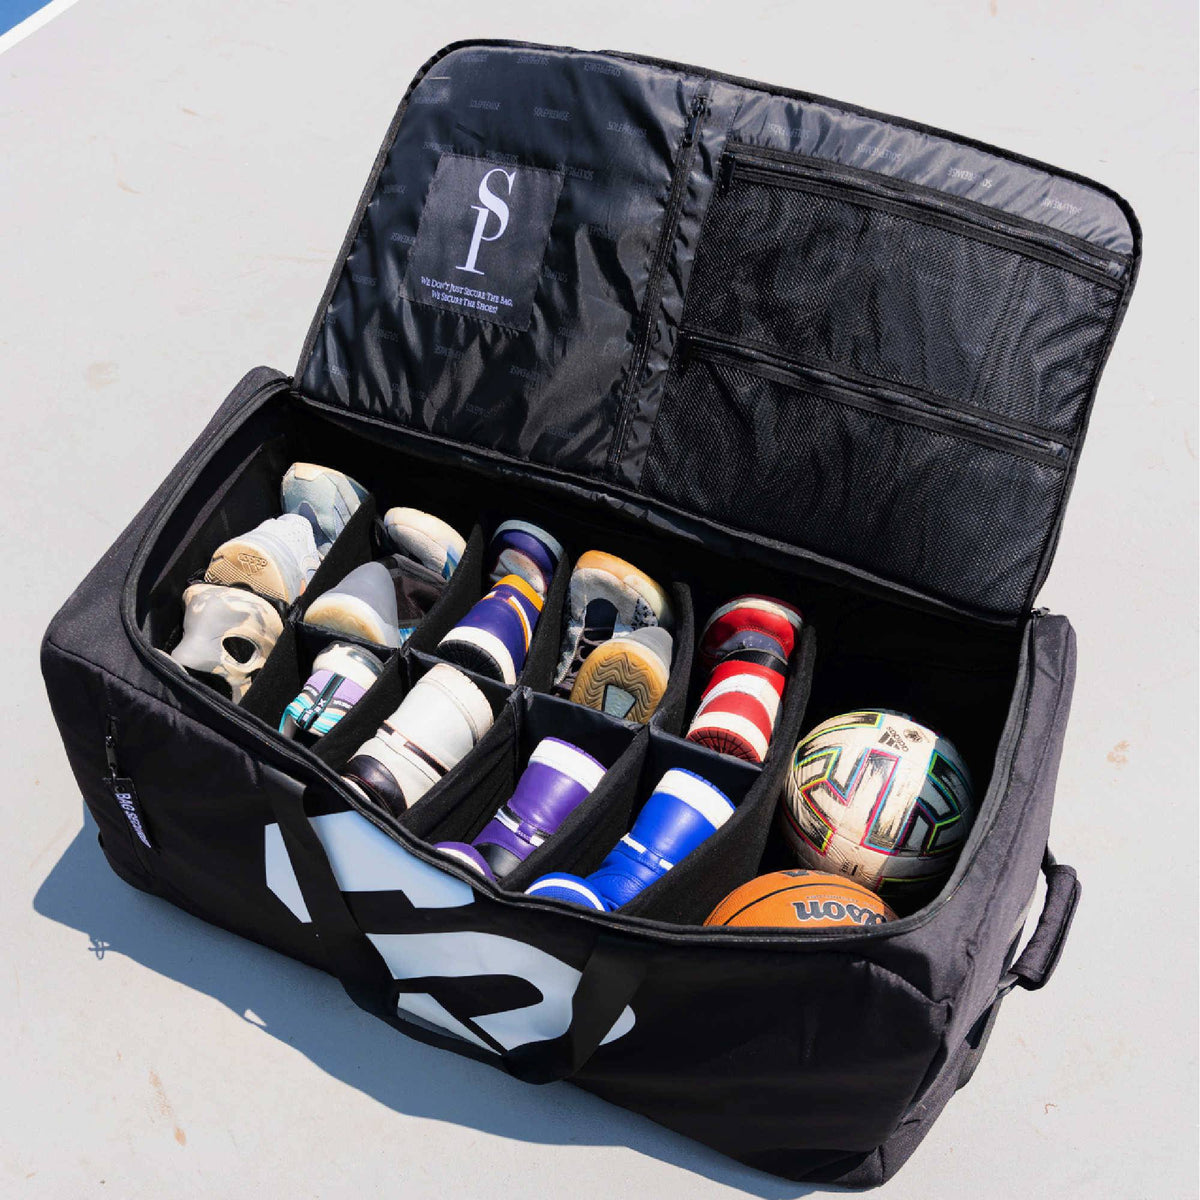 Oversized Sports Equipment Bag With Wheels (Holds 18-20 Pairs of